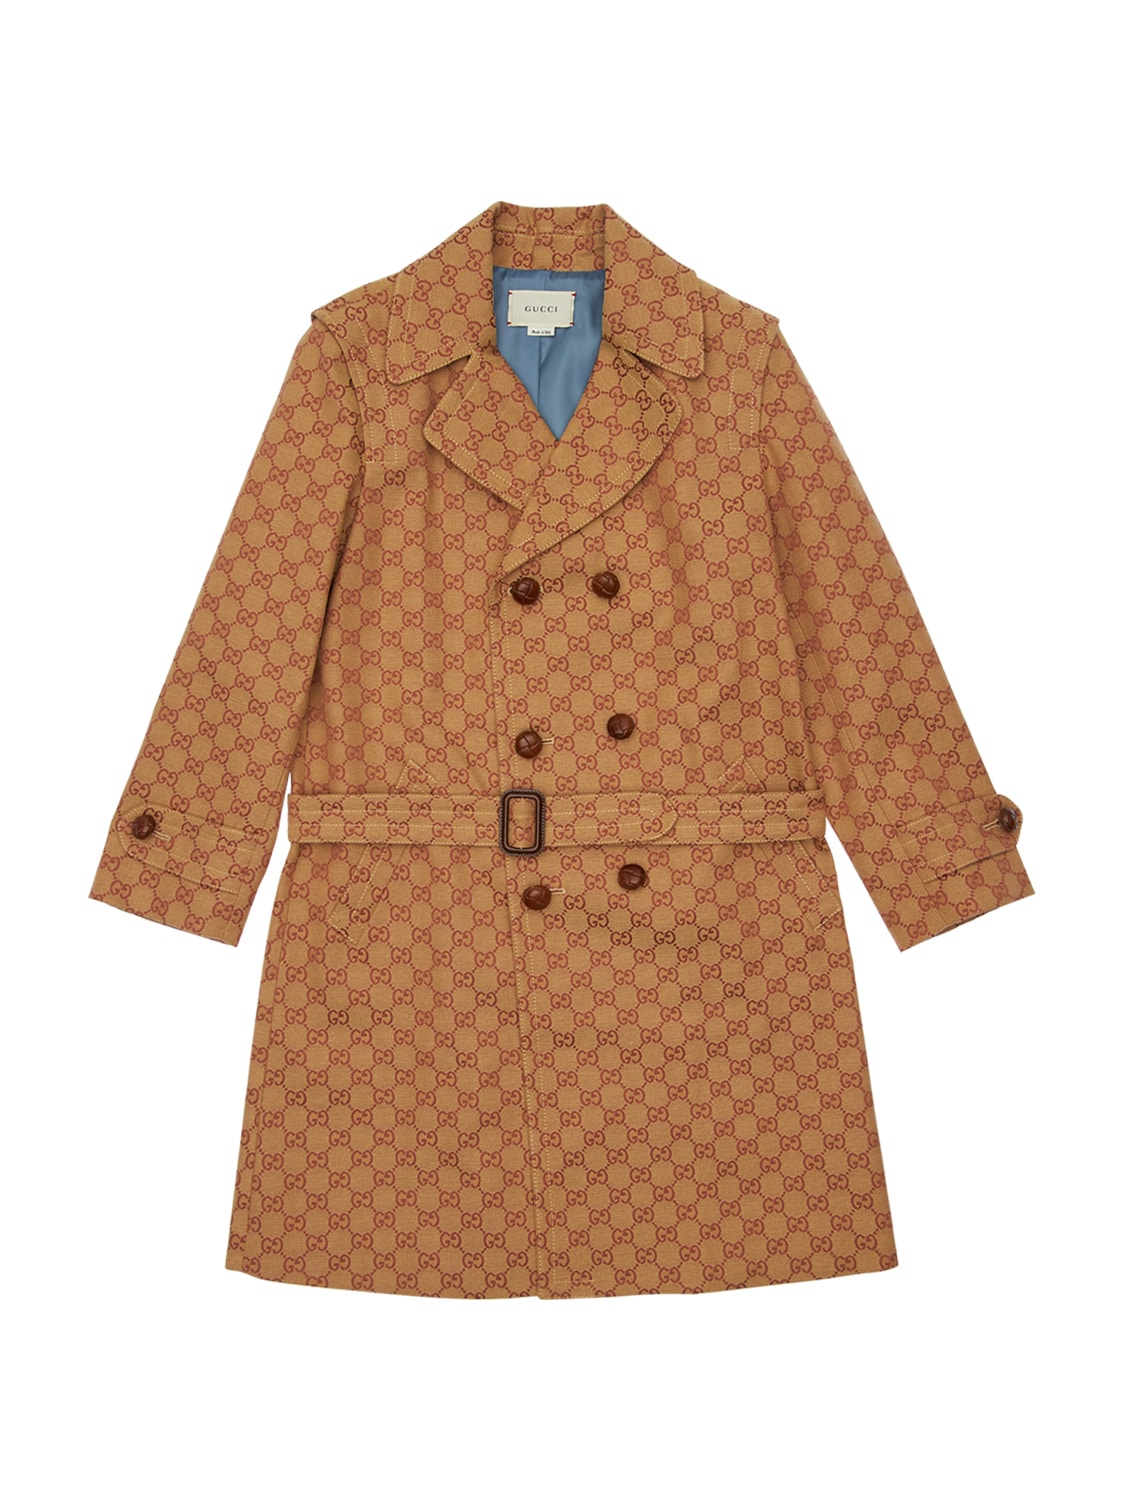 GUCCI ALL OVER LOGO COTTON CANVAS TRENCH COAT,71IFH9003-OTU1OQ2